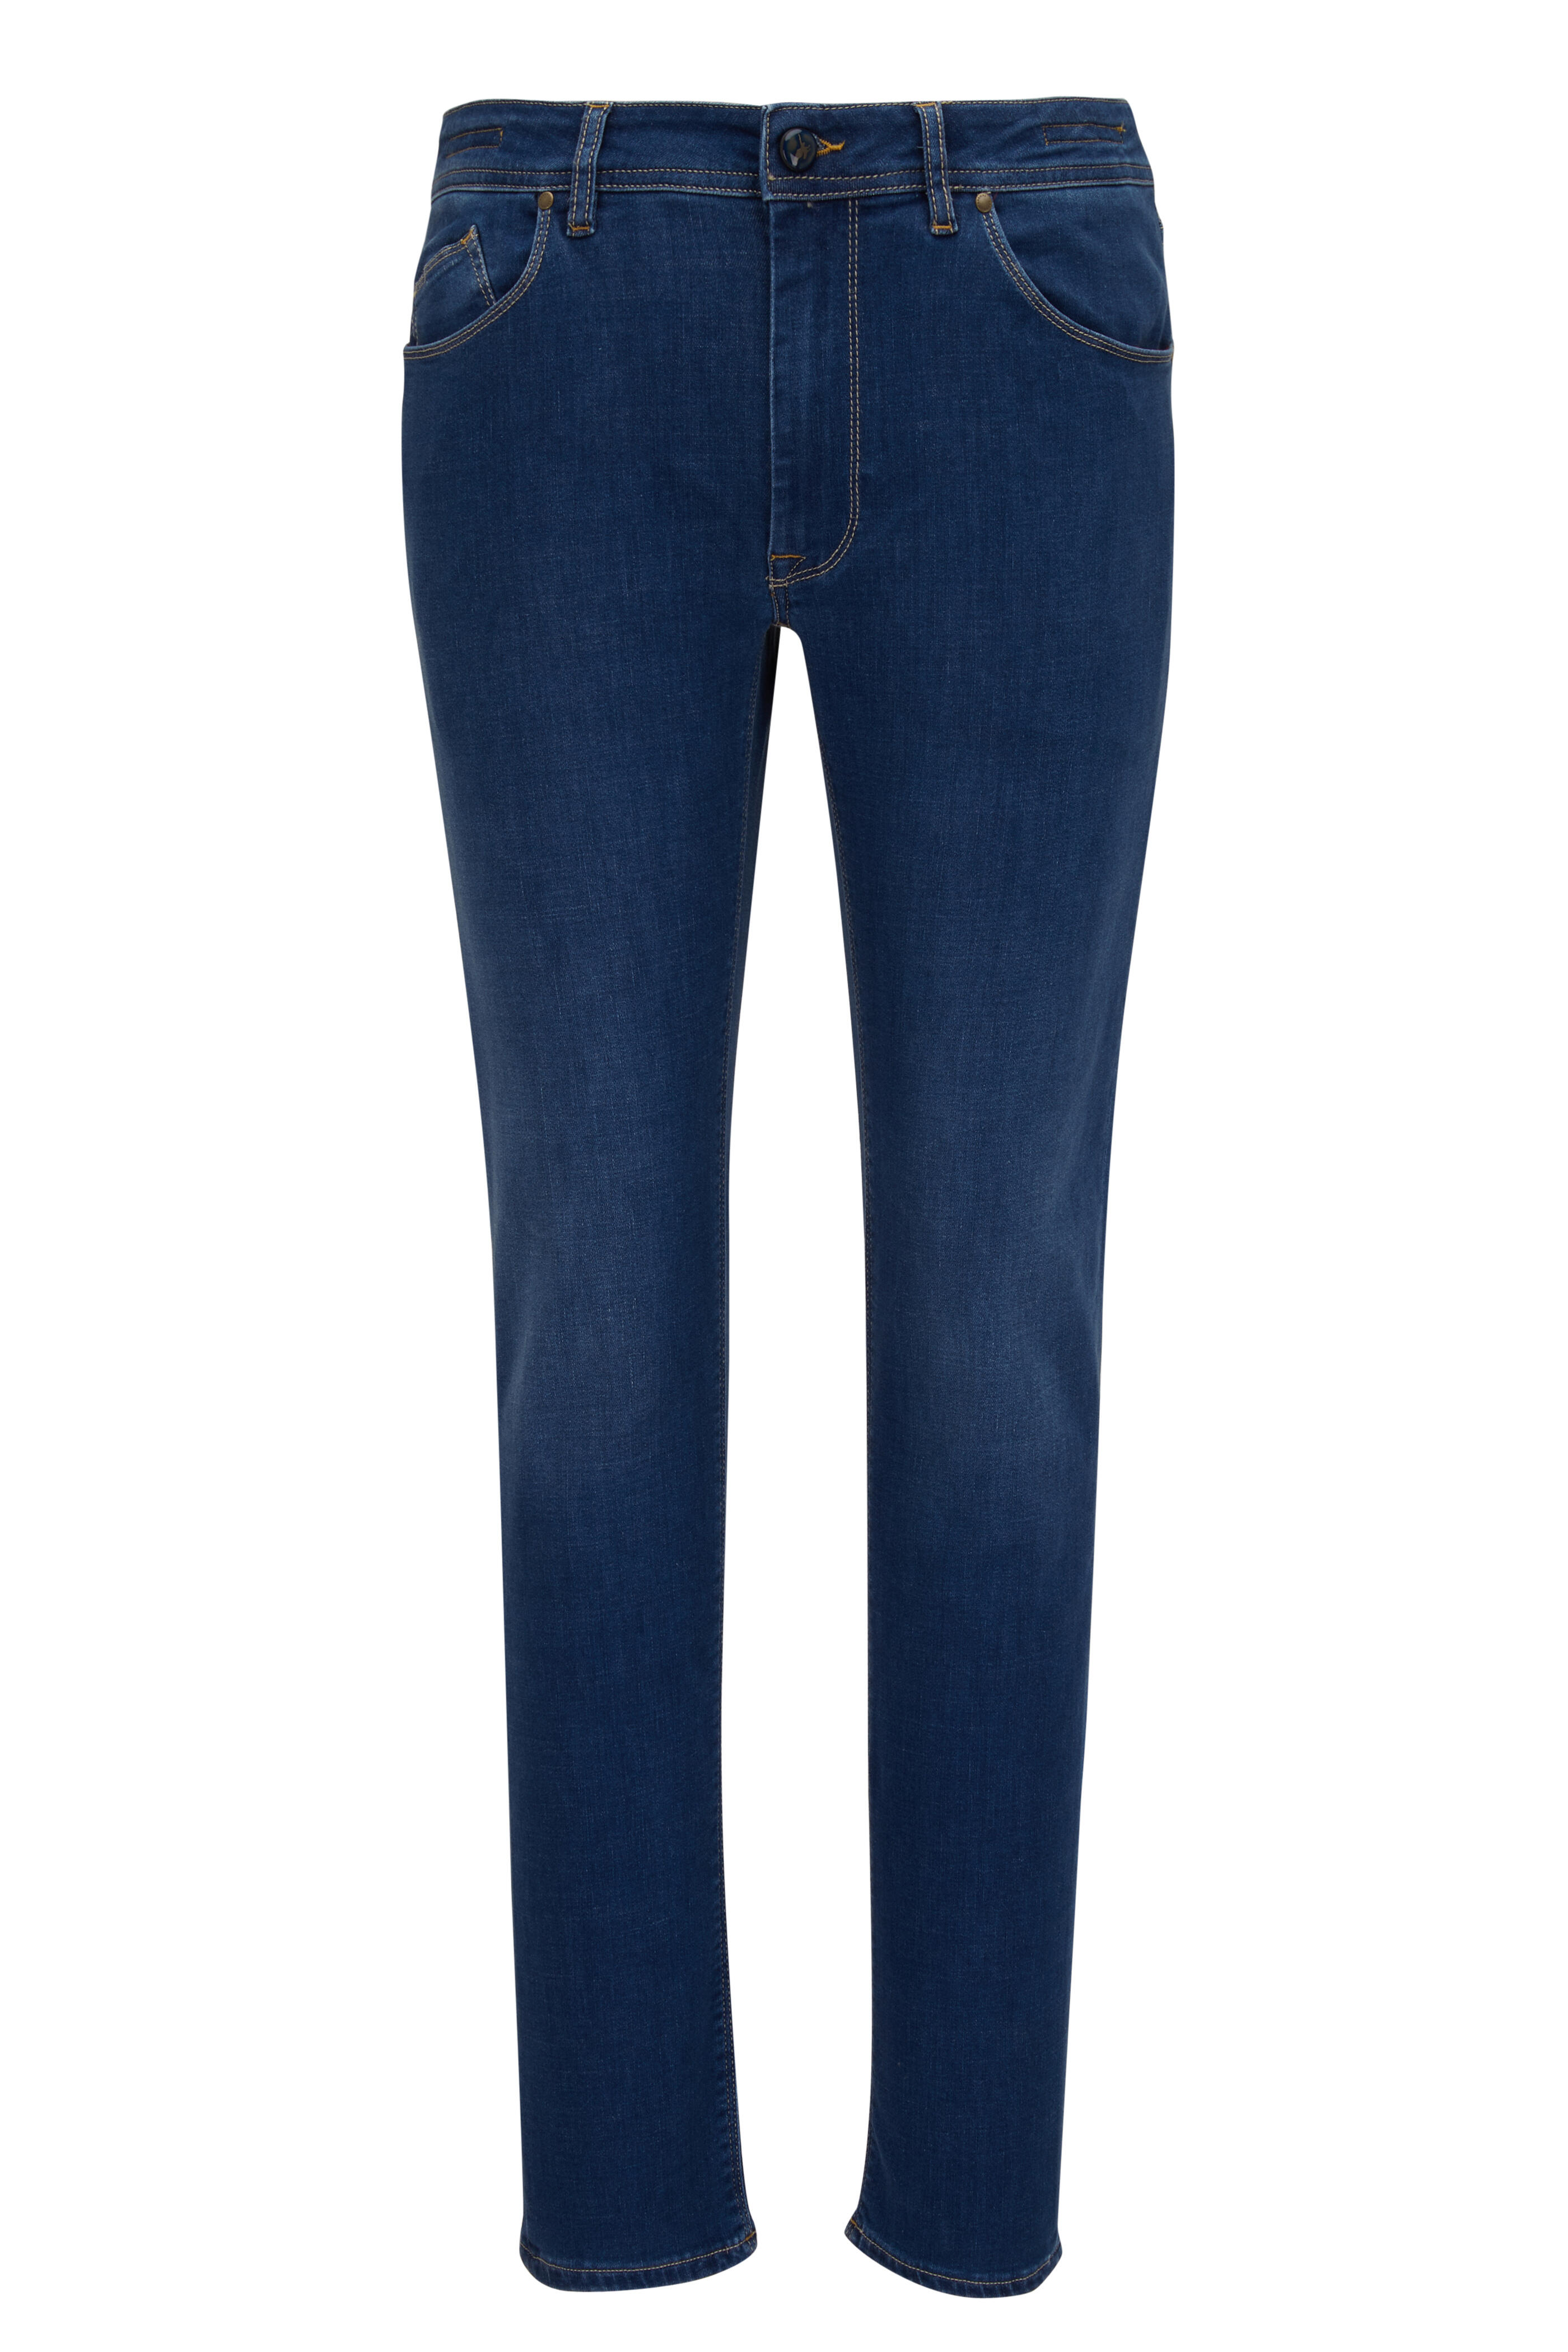 Barmas - Dean Light Blue Mid-Rise Jean | Mitchell Stores